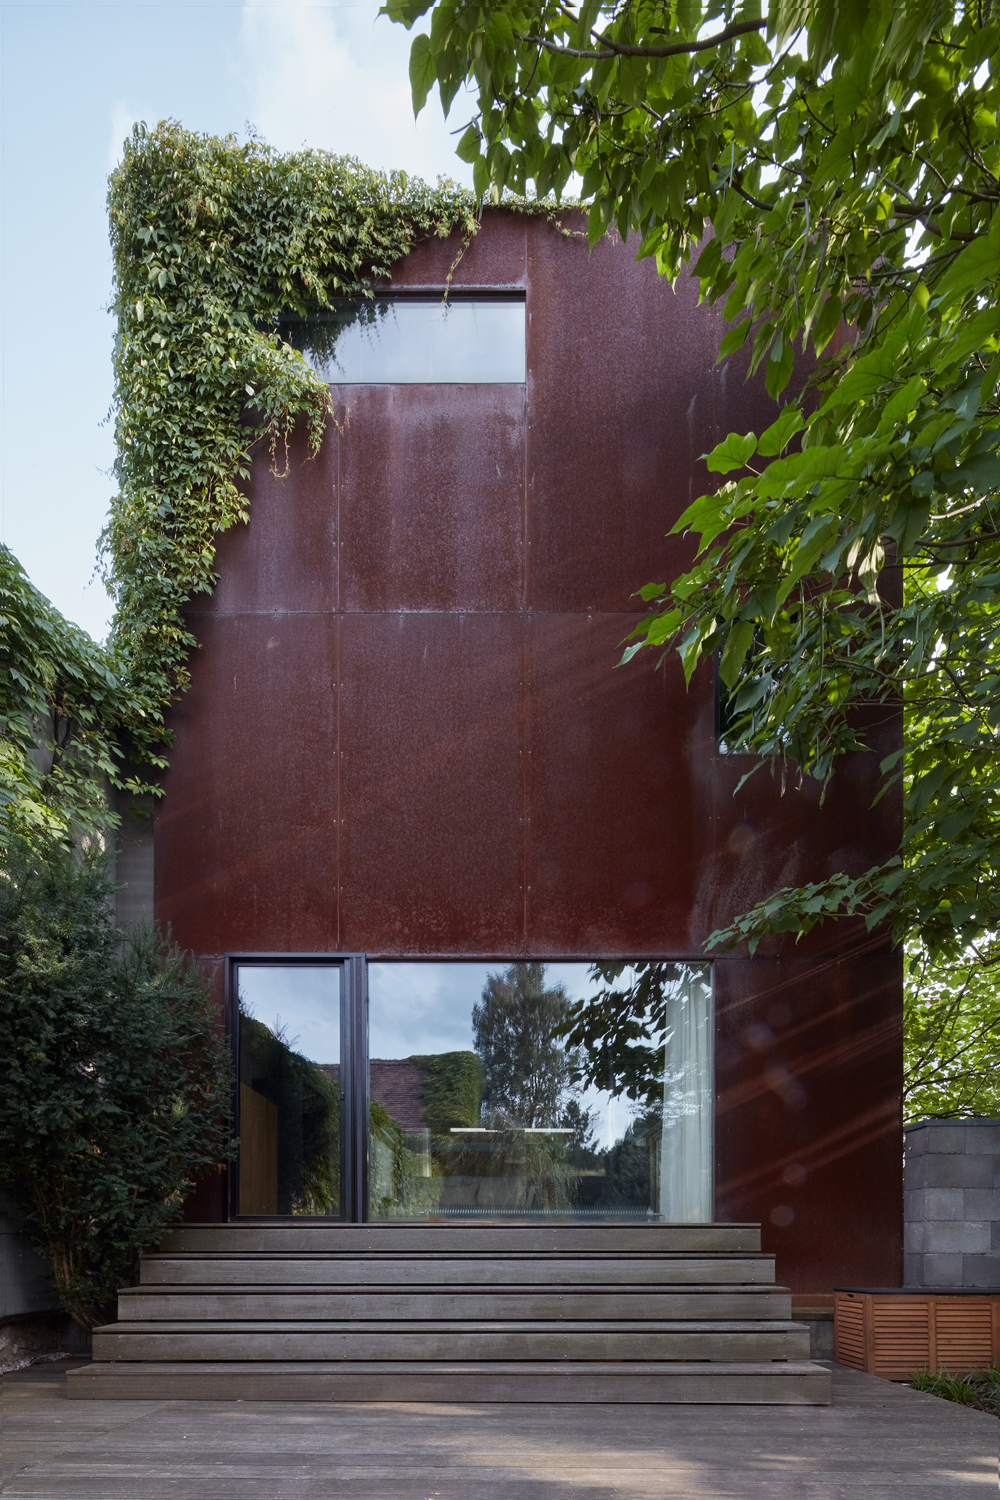 Rusty House by OK Plan Architects is a study in contrasts